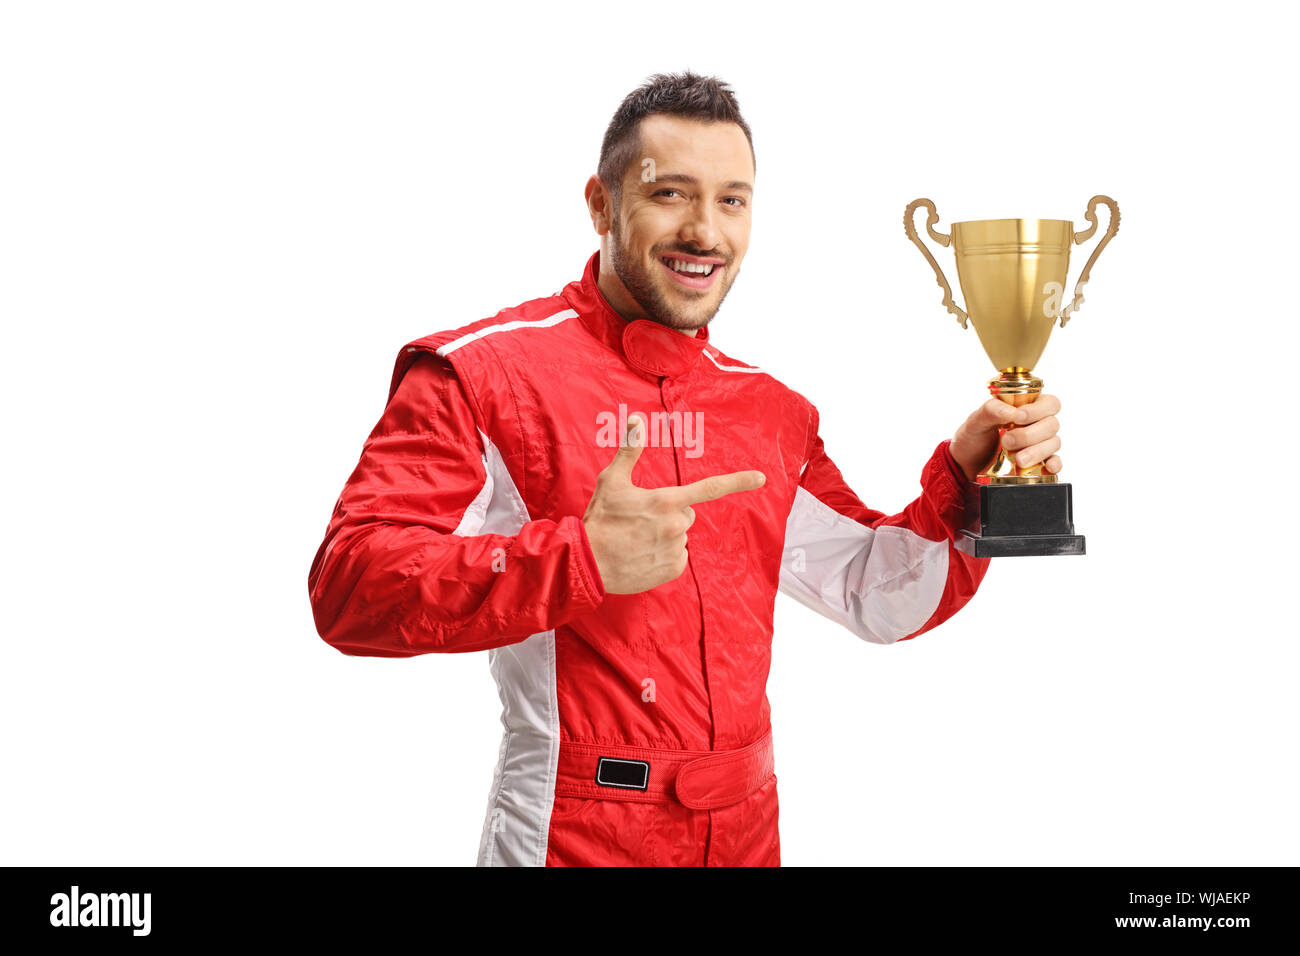 Car racer winner holding a gold trophy cup and pointing at it isolated on white background Stock Photo